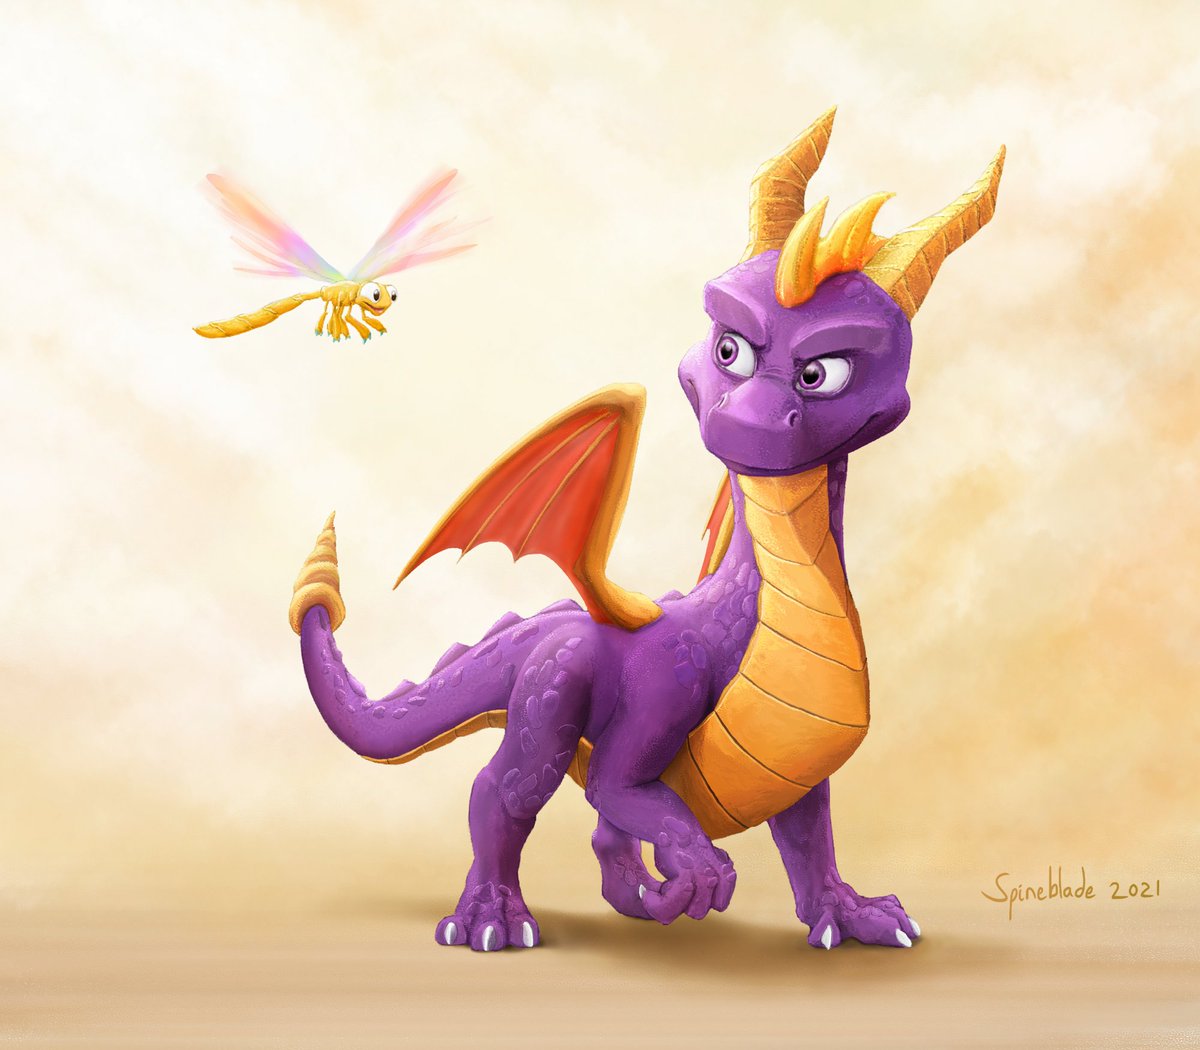 Still, incredibly, the very first drawing I posted over a year and a half ago, of Spyro and Sparx